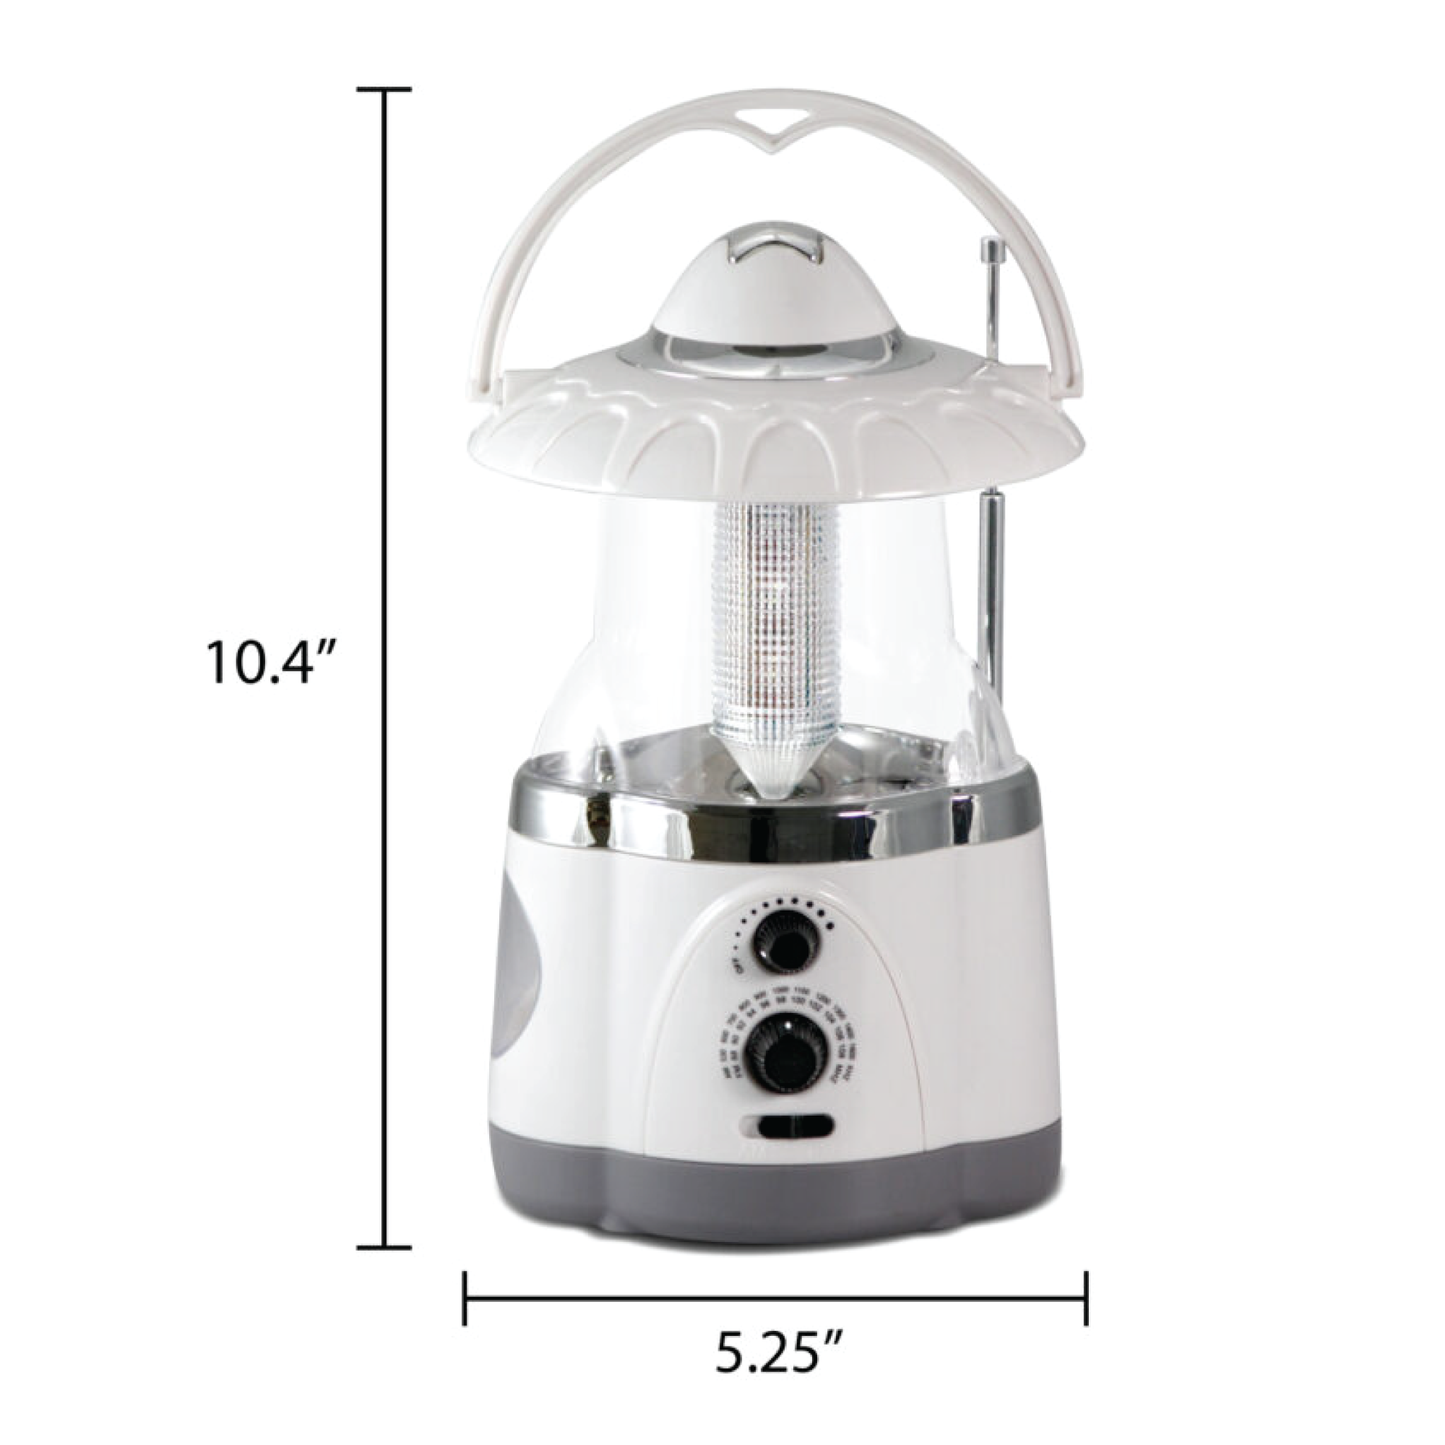 North Point® white AM/FM radio lantern, standing at 10.4" tall and measuring 5.25" wide.